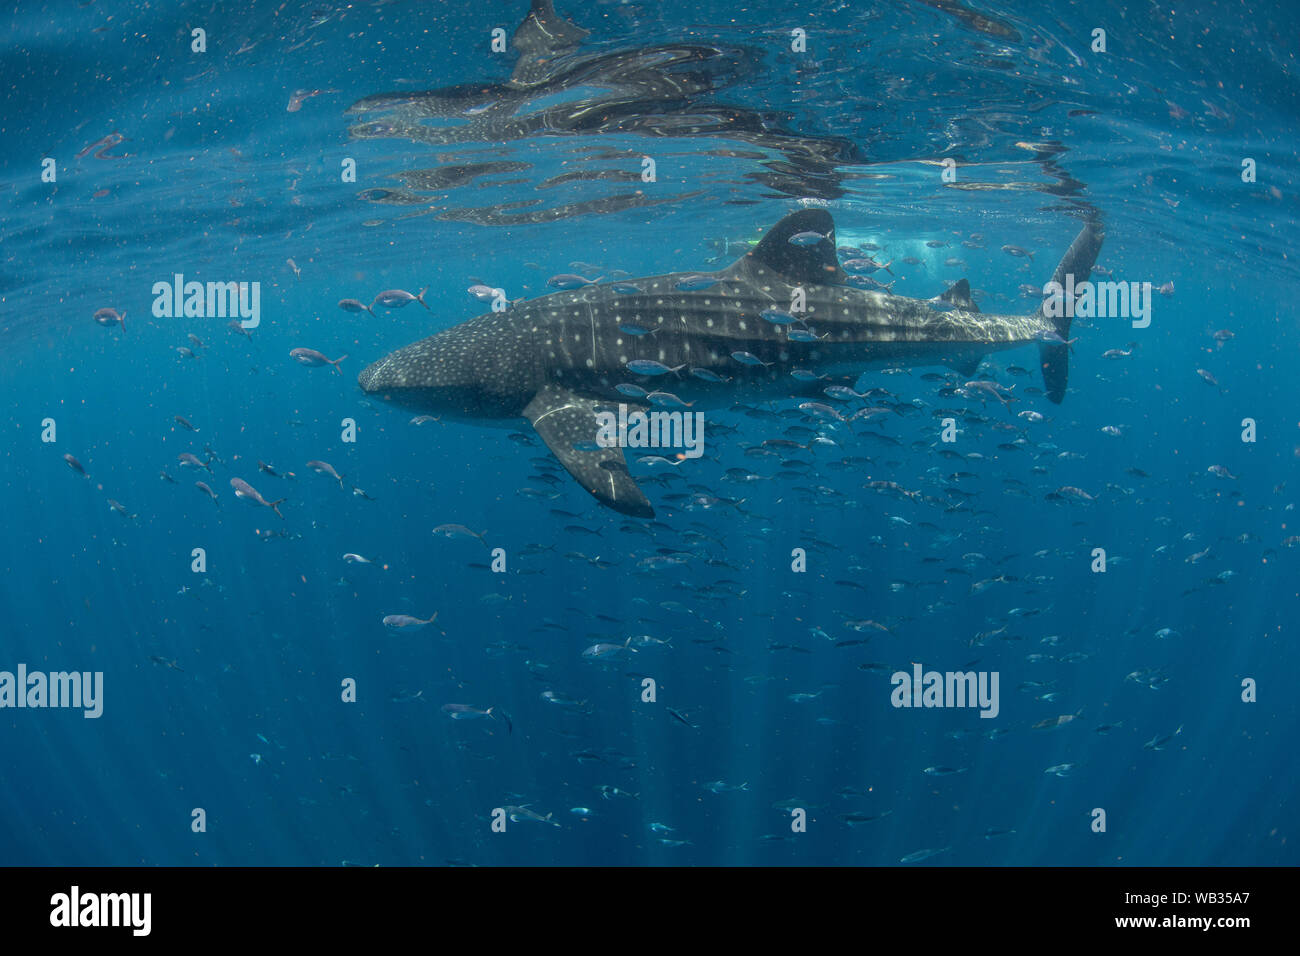 Whale shark surrounded by fish with sunbeams, Isla Mujeres Mexico Stock Photo